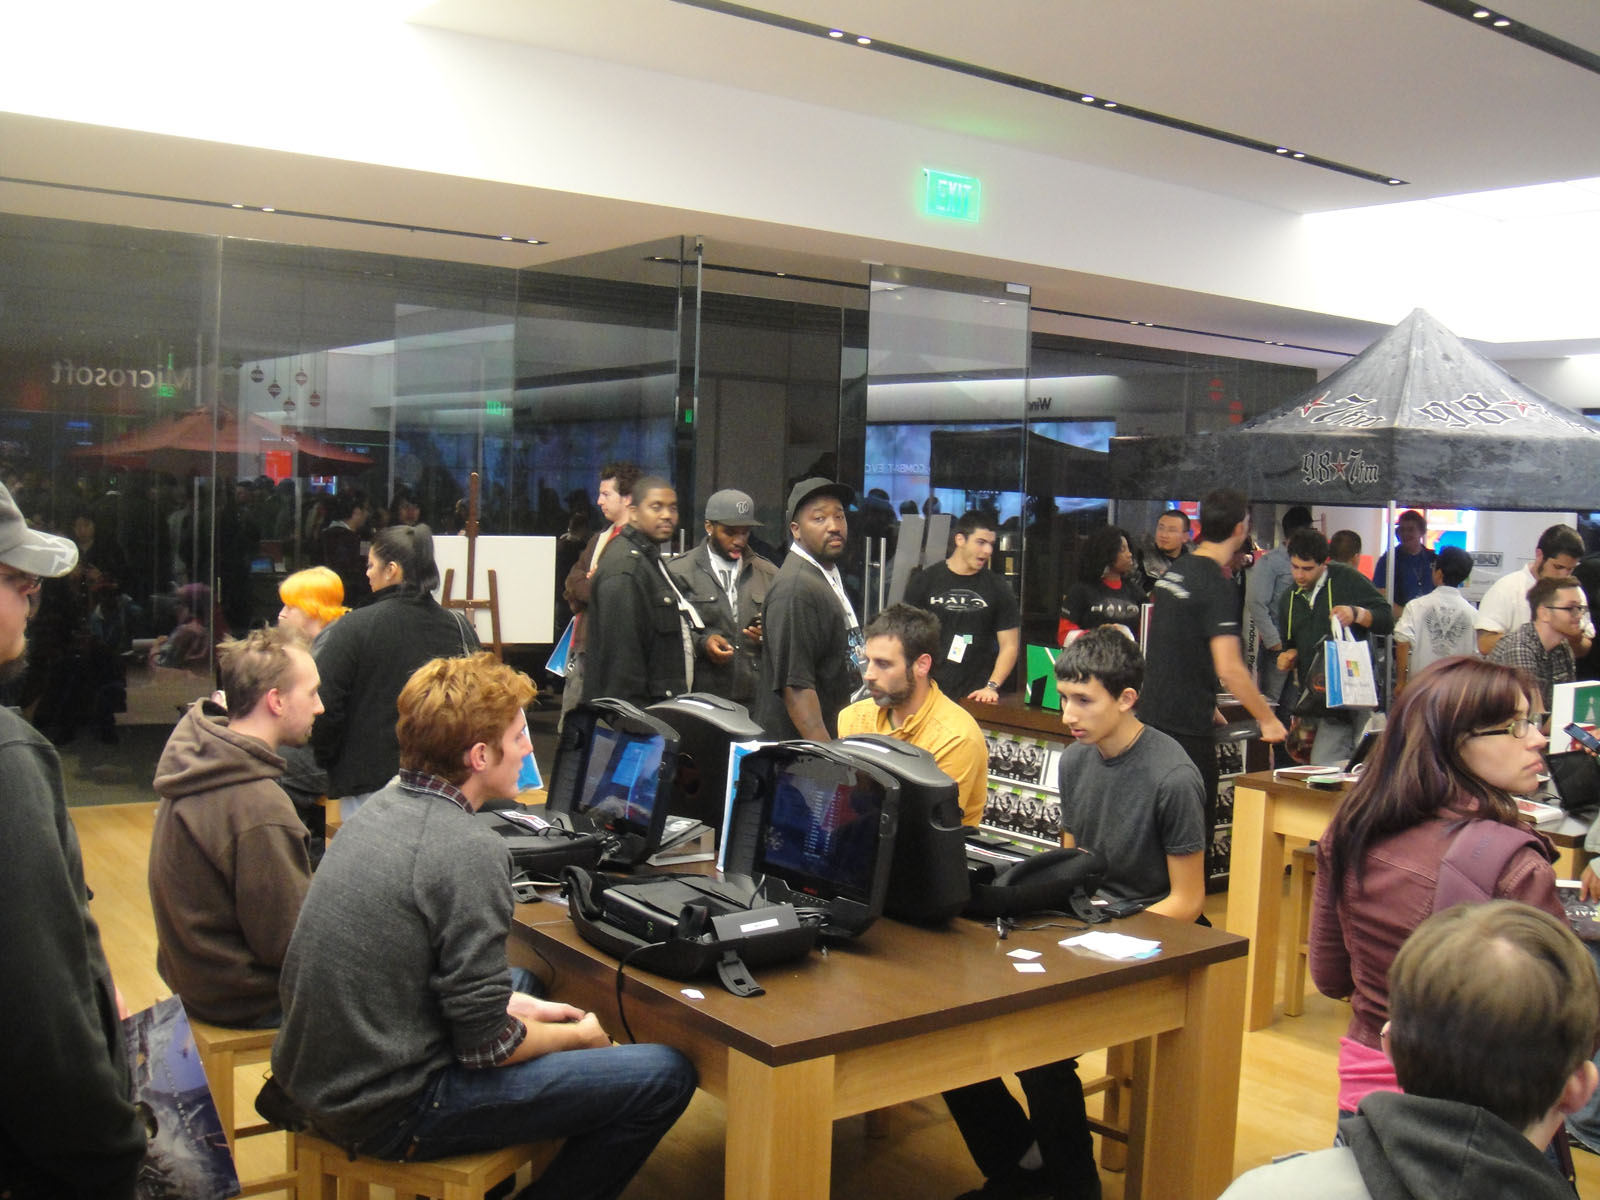 people looking at various computers and electronic devices on tables